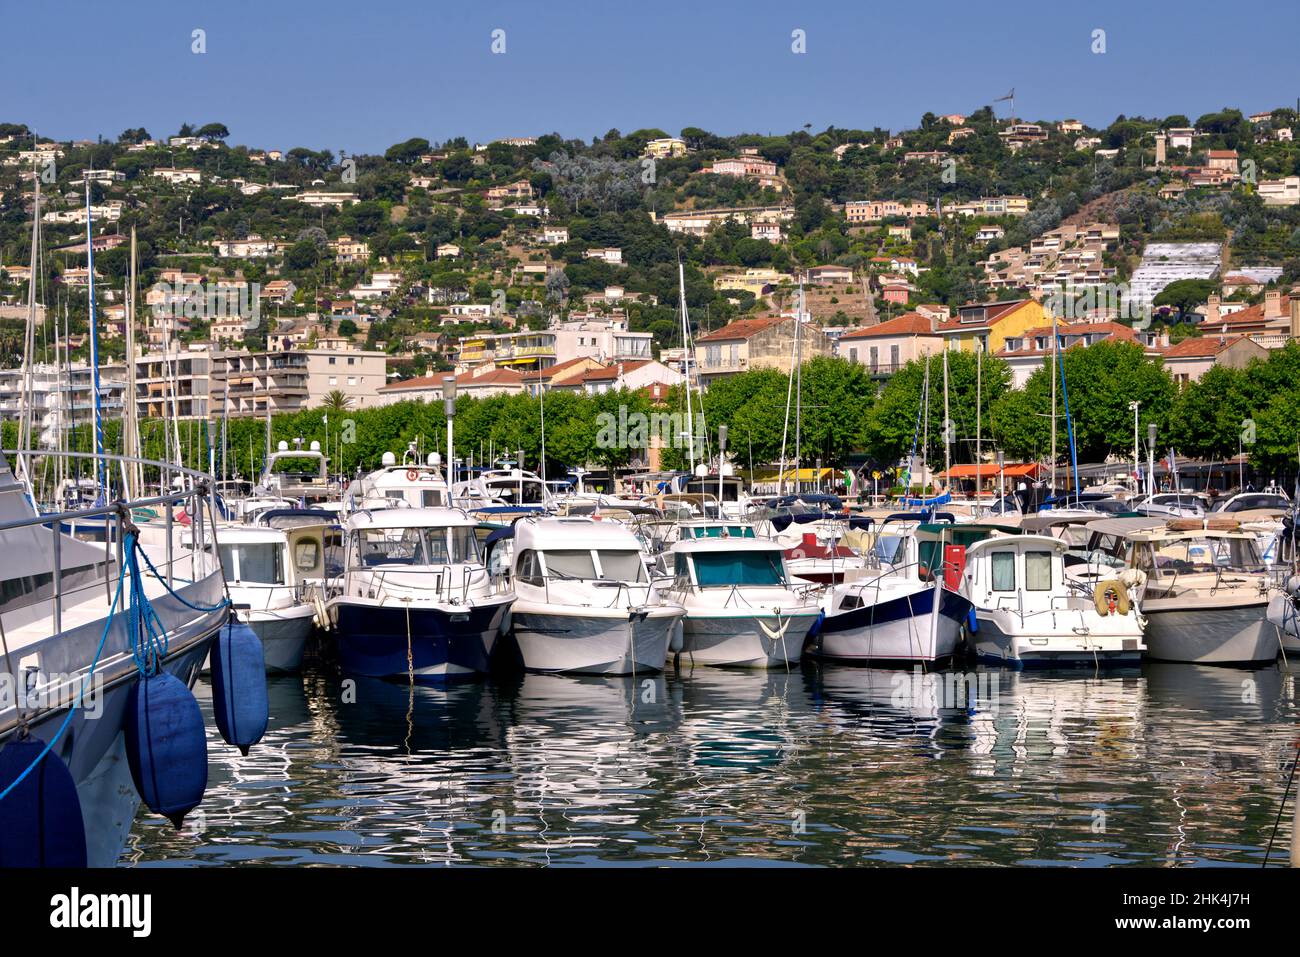 Harbor of Golfe-Juan, commune of the Alpes-Maritimes department, which belongs in turn to the Provence-Alpes-Côte d'Azur region of France Stock Photo